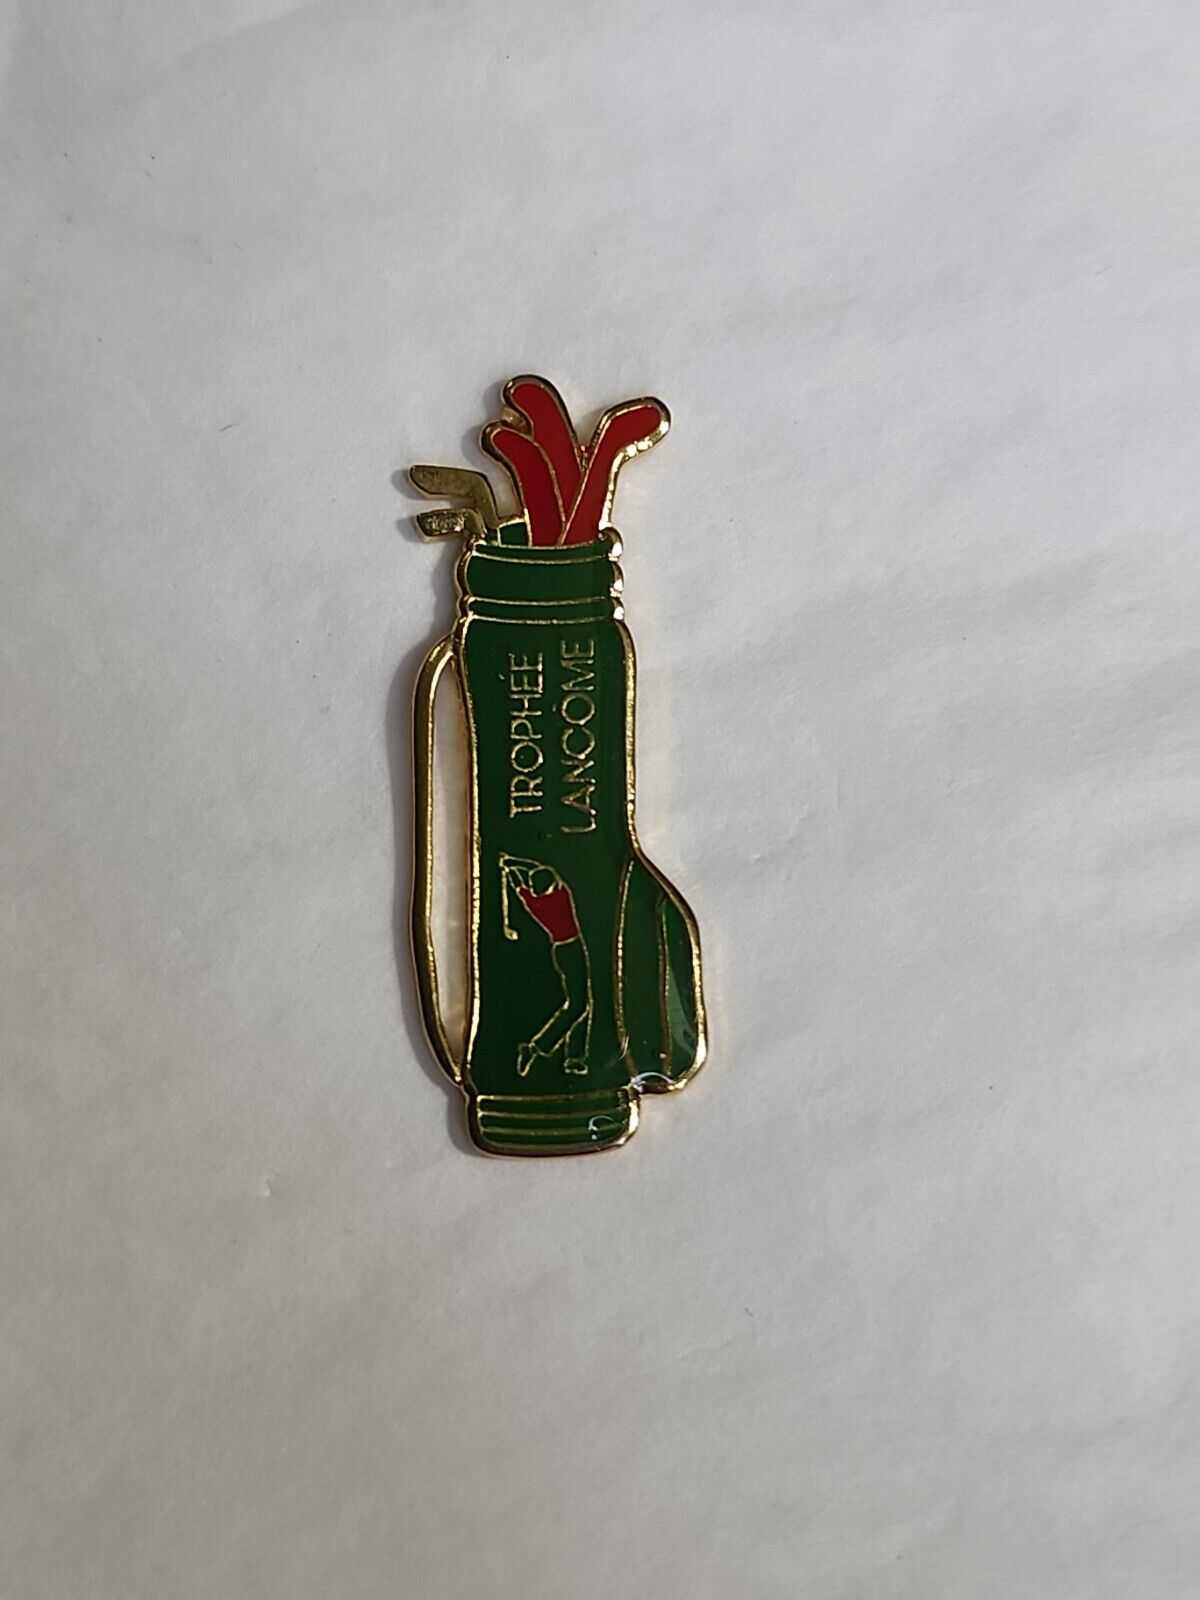 Trophee Lancome Golf Bag Lapel Pin French Golf Tournament from 1970 to 2003